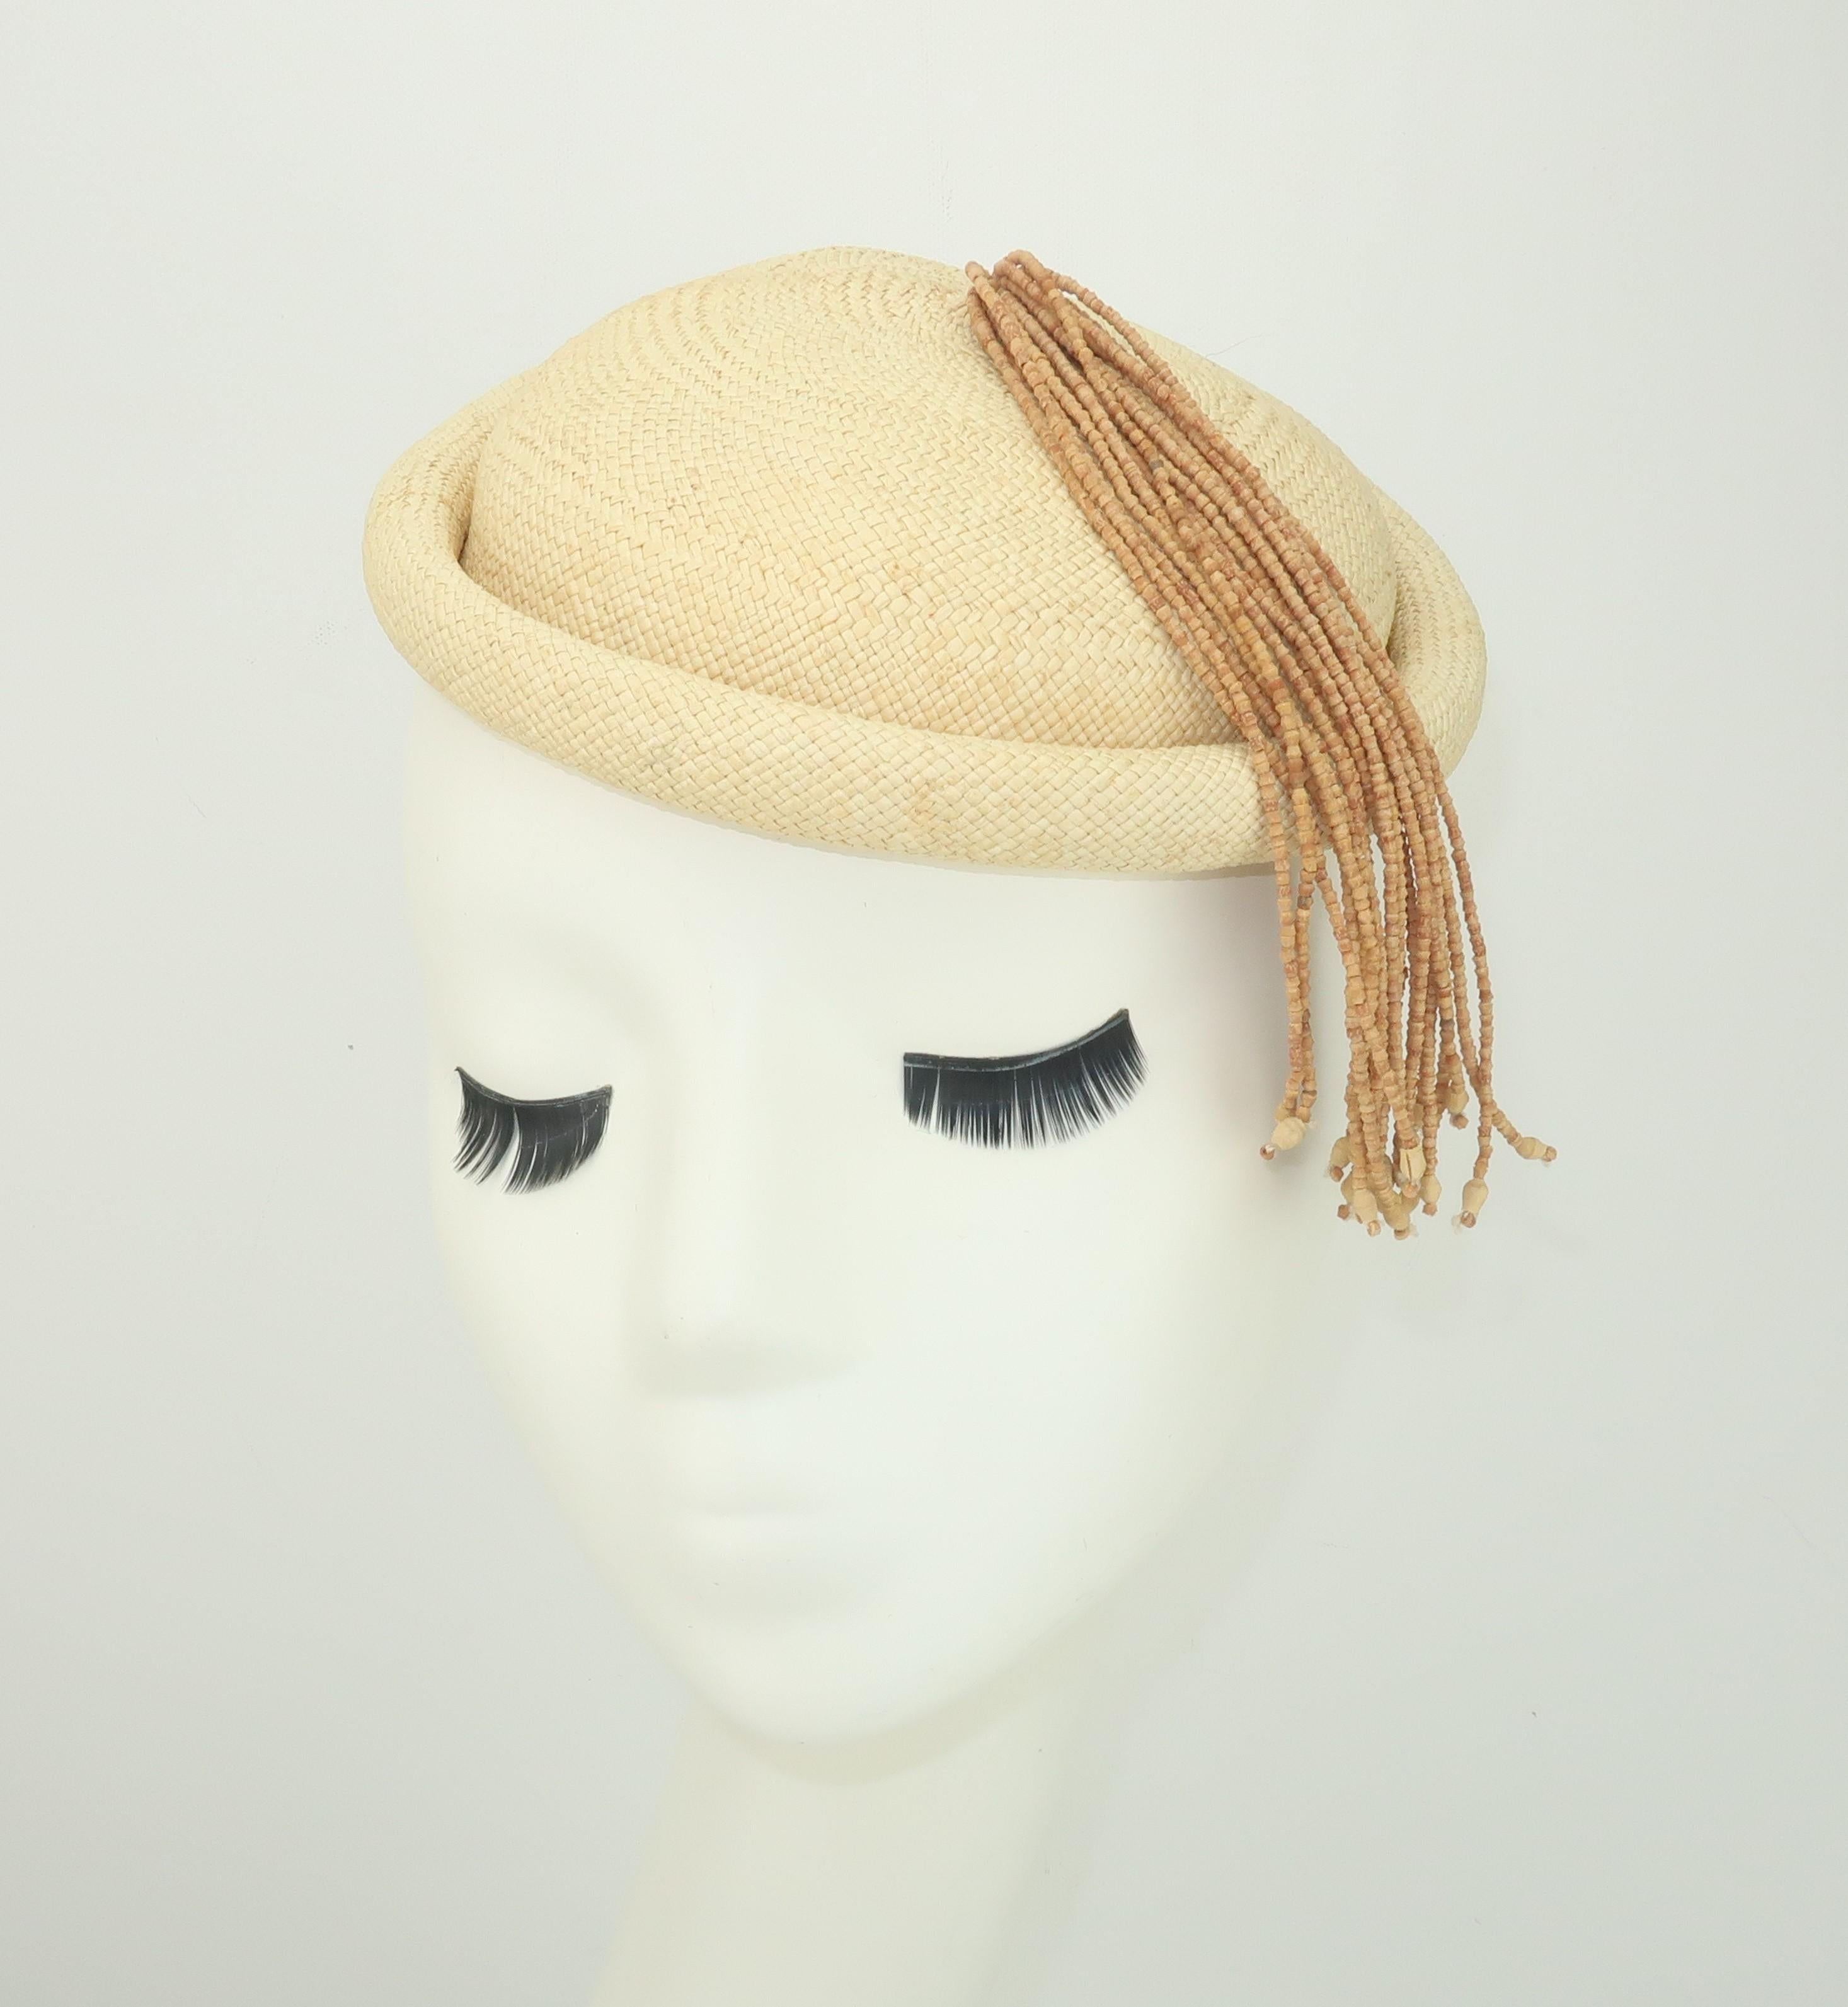 A light natural straw disk shaped fascinator style hat with a wooden beaded tassel finial by Rosemary Peck.  Cute little topper for accessorizing your favorite tropical prints.  From the living estate of an amazing fashionista who was born in the